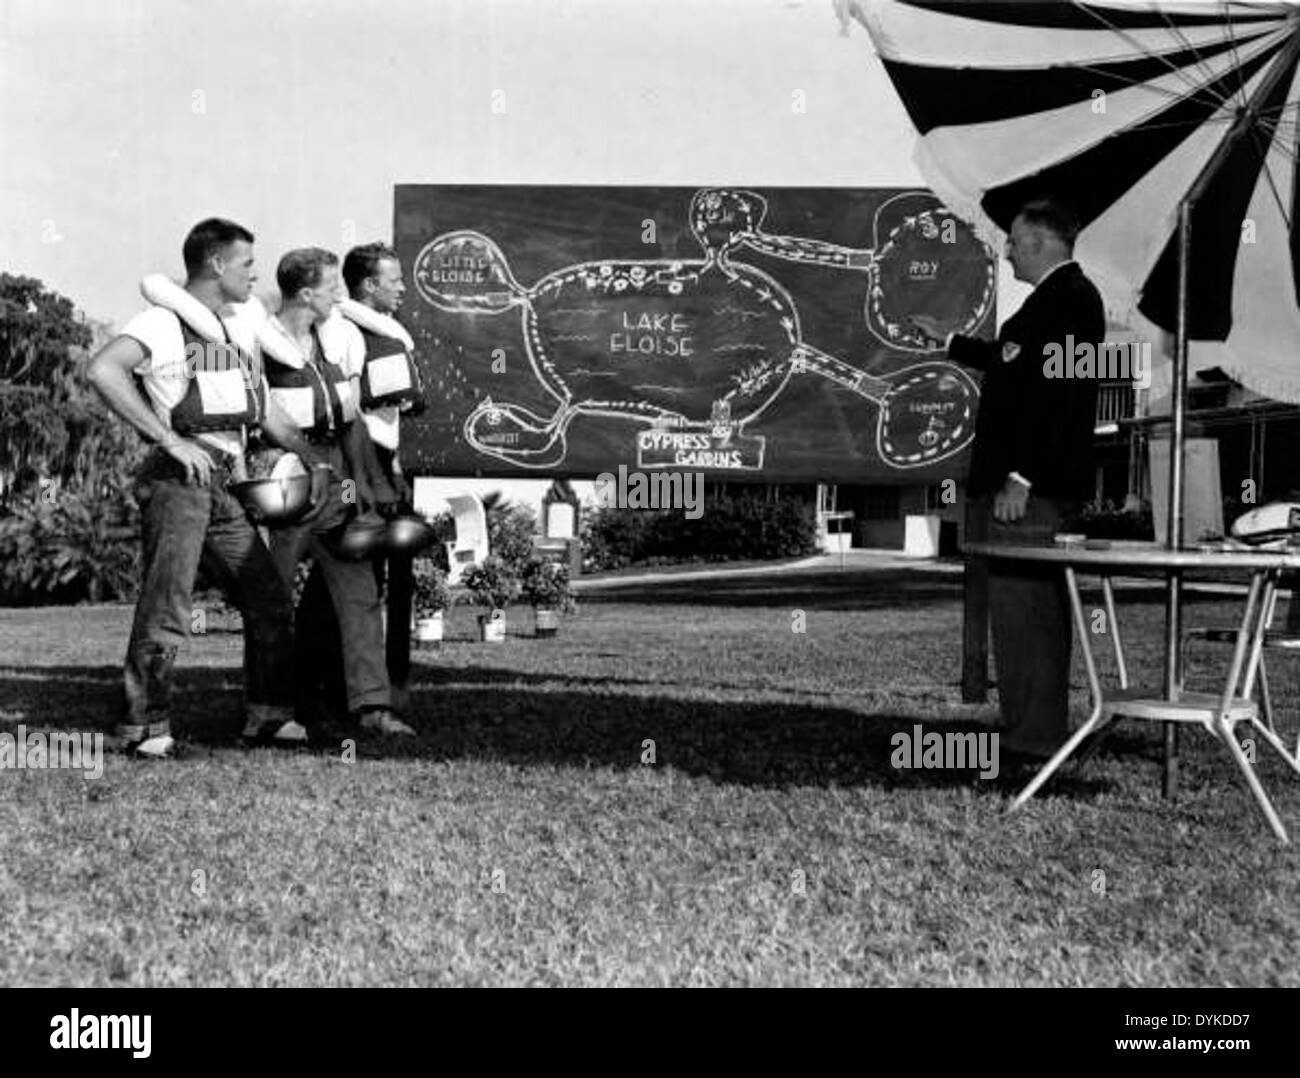 Men looking at a boat race map - Cypress Gardens Stock Photo